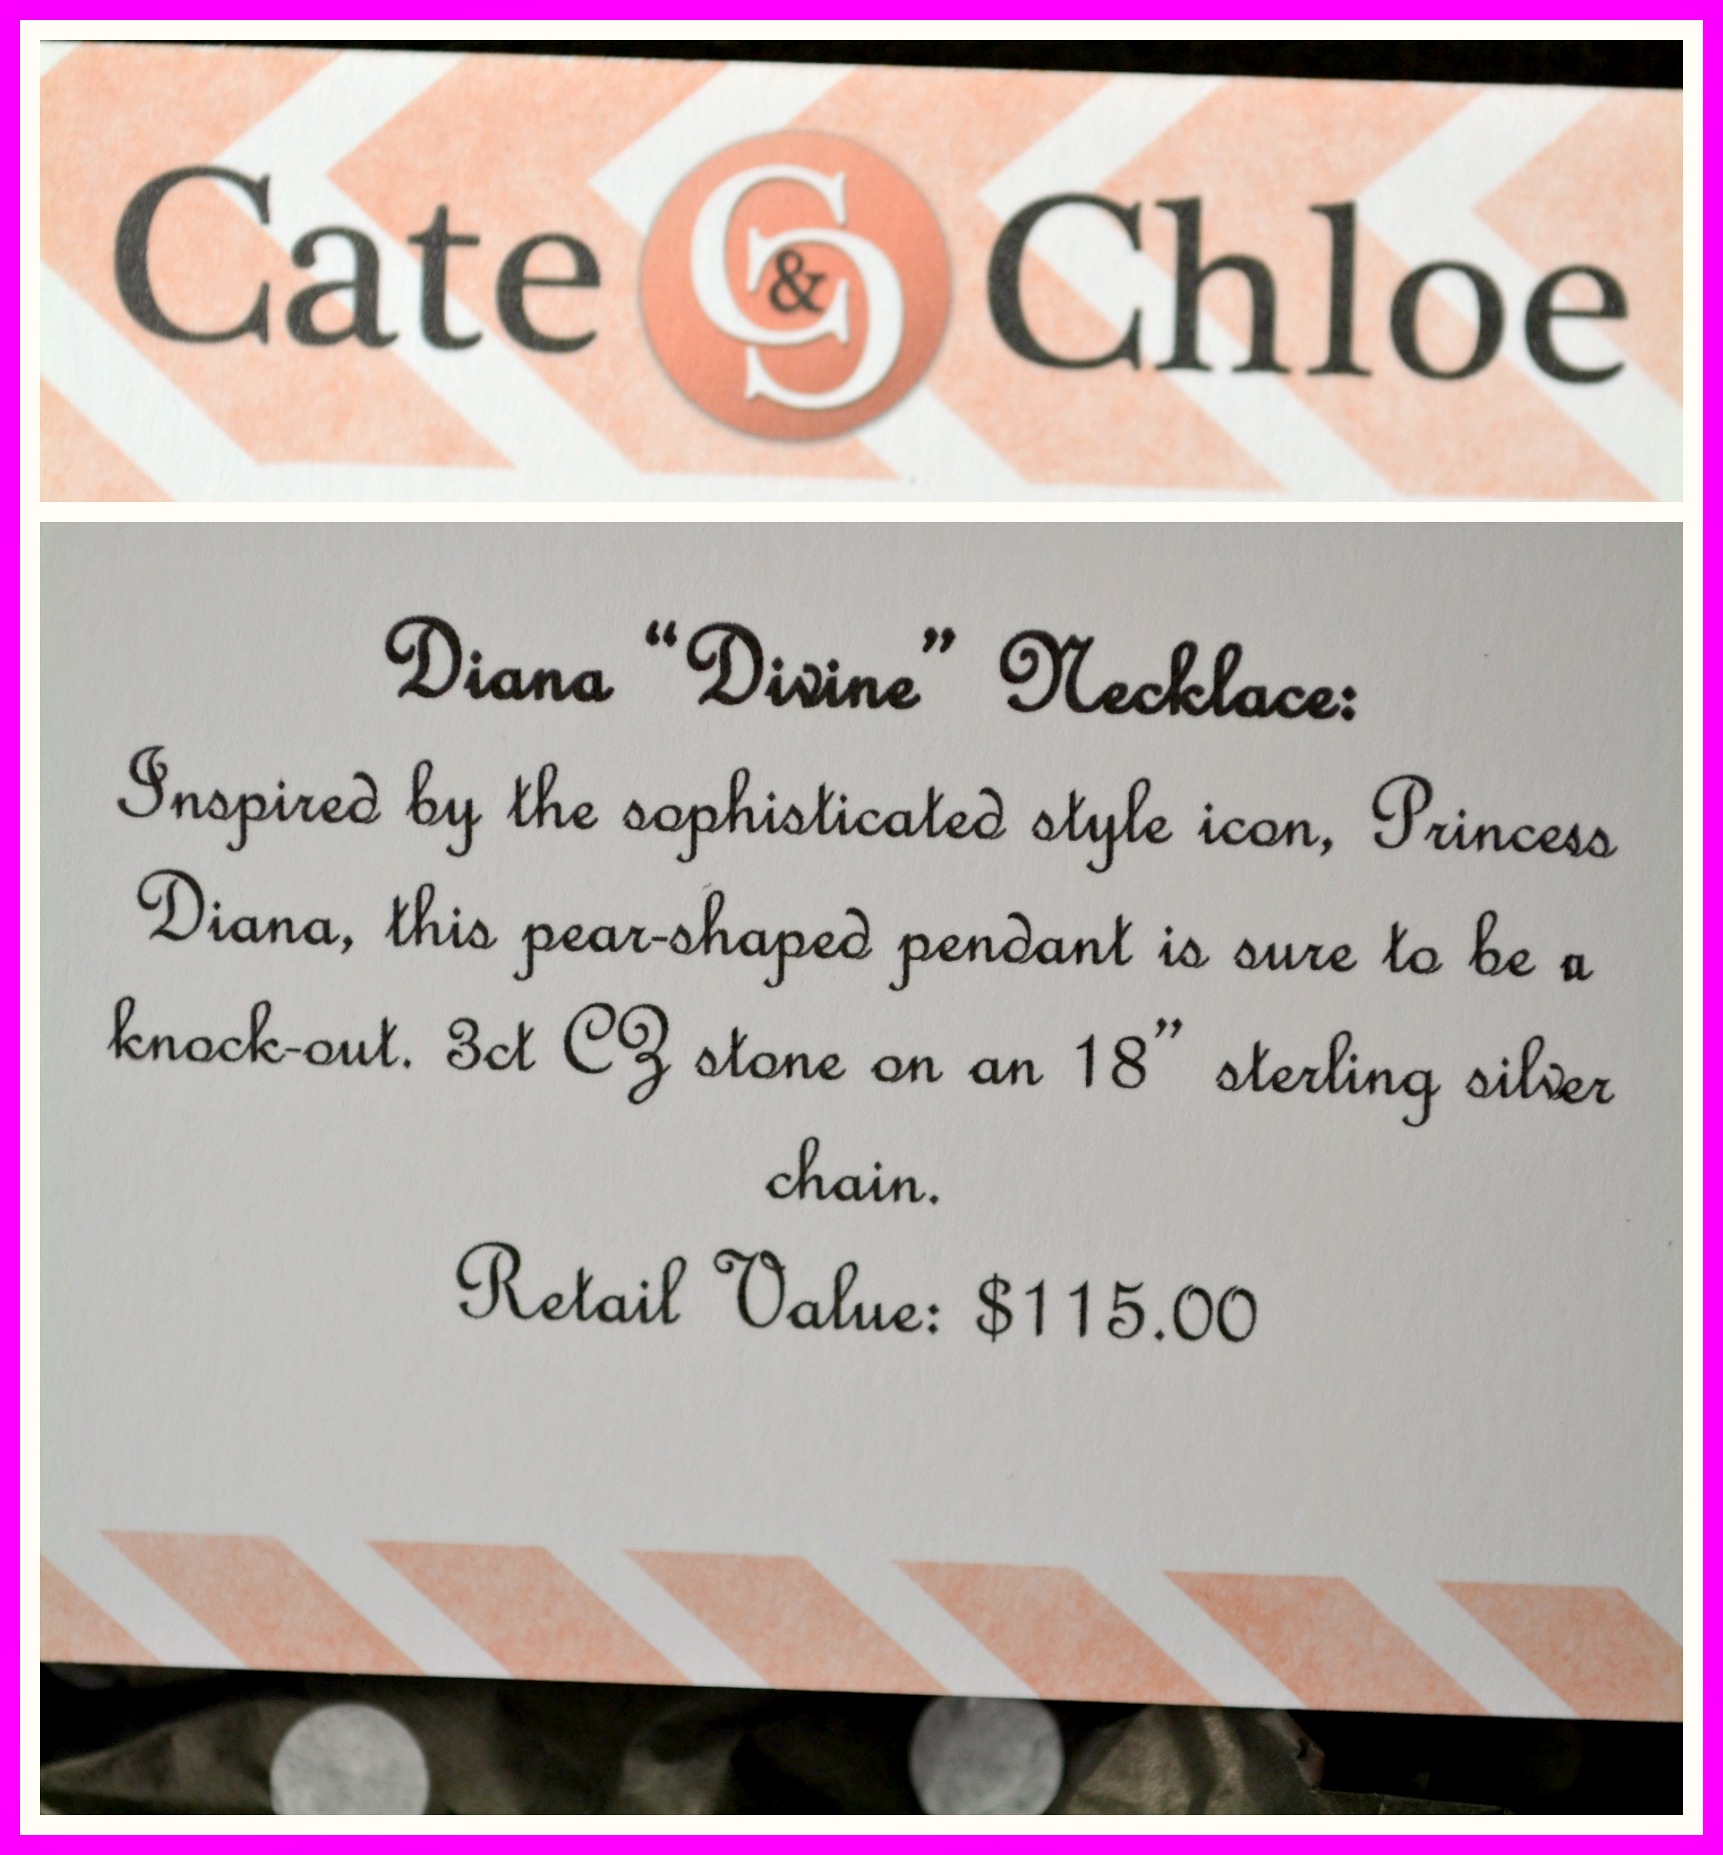 Cate & Chloe VIP Jewelry Subscription Box Review